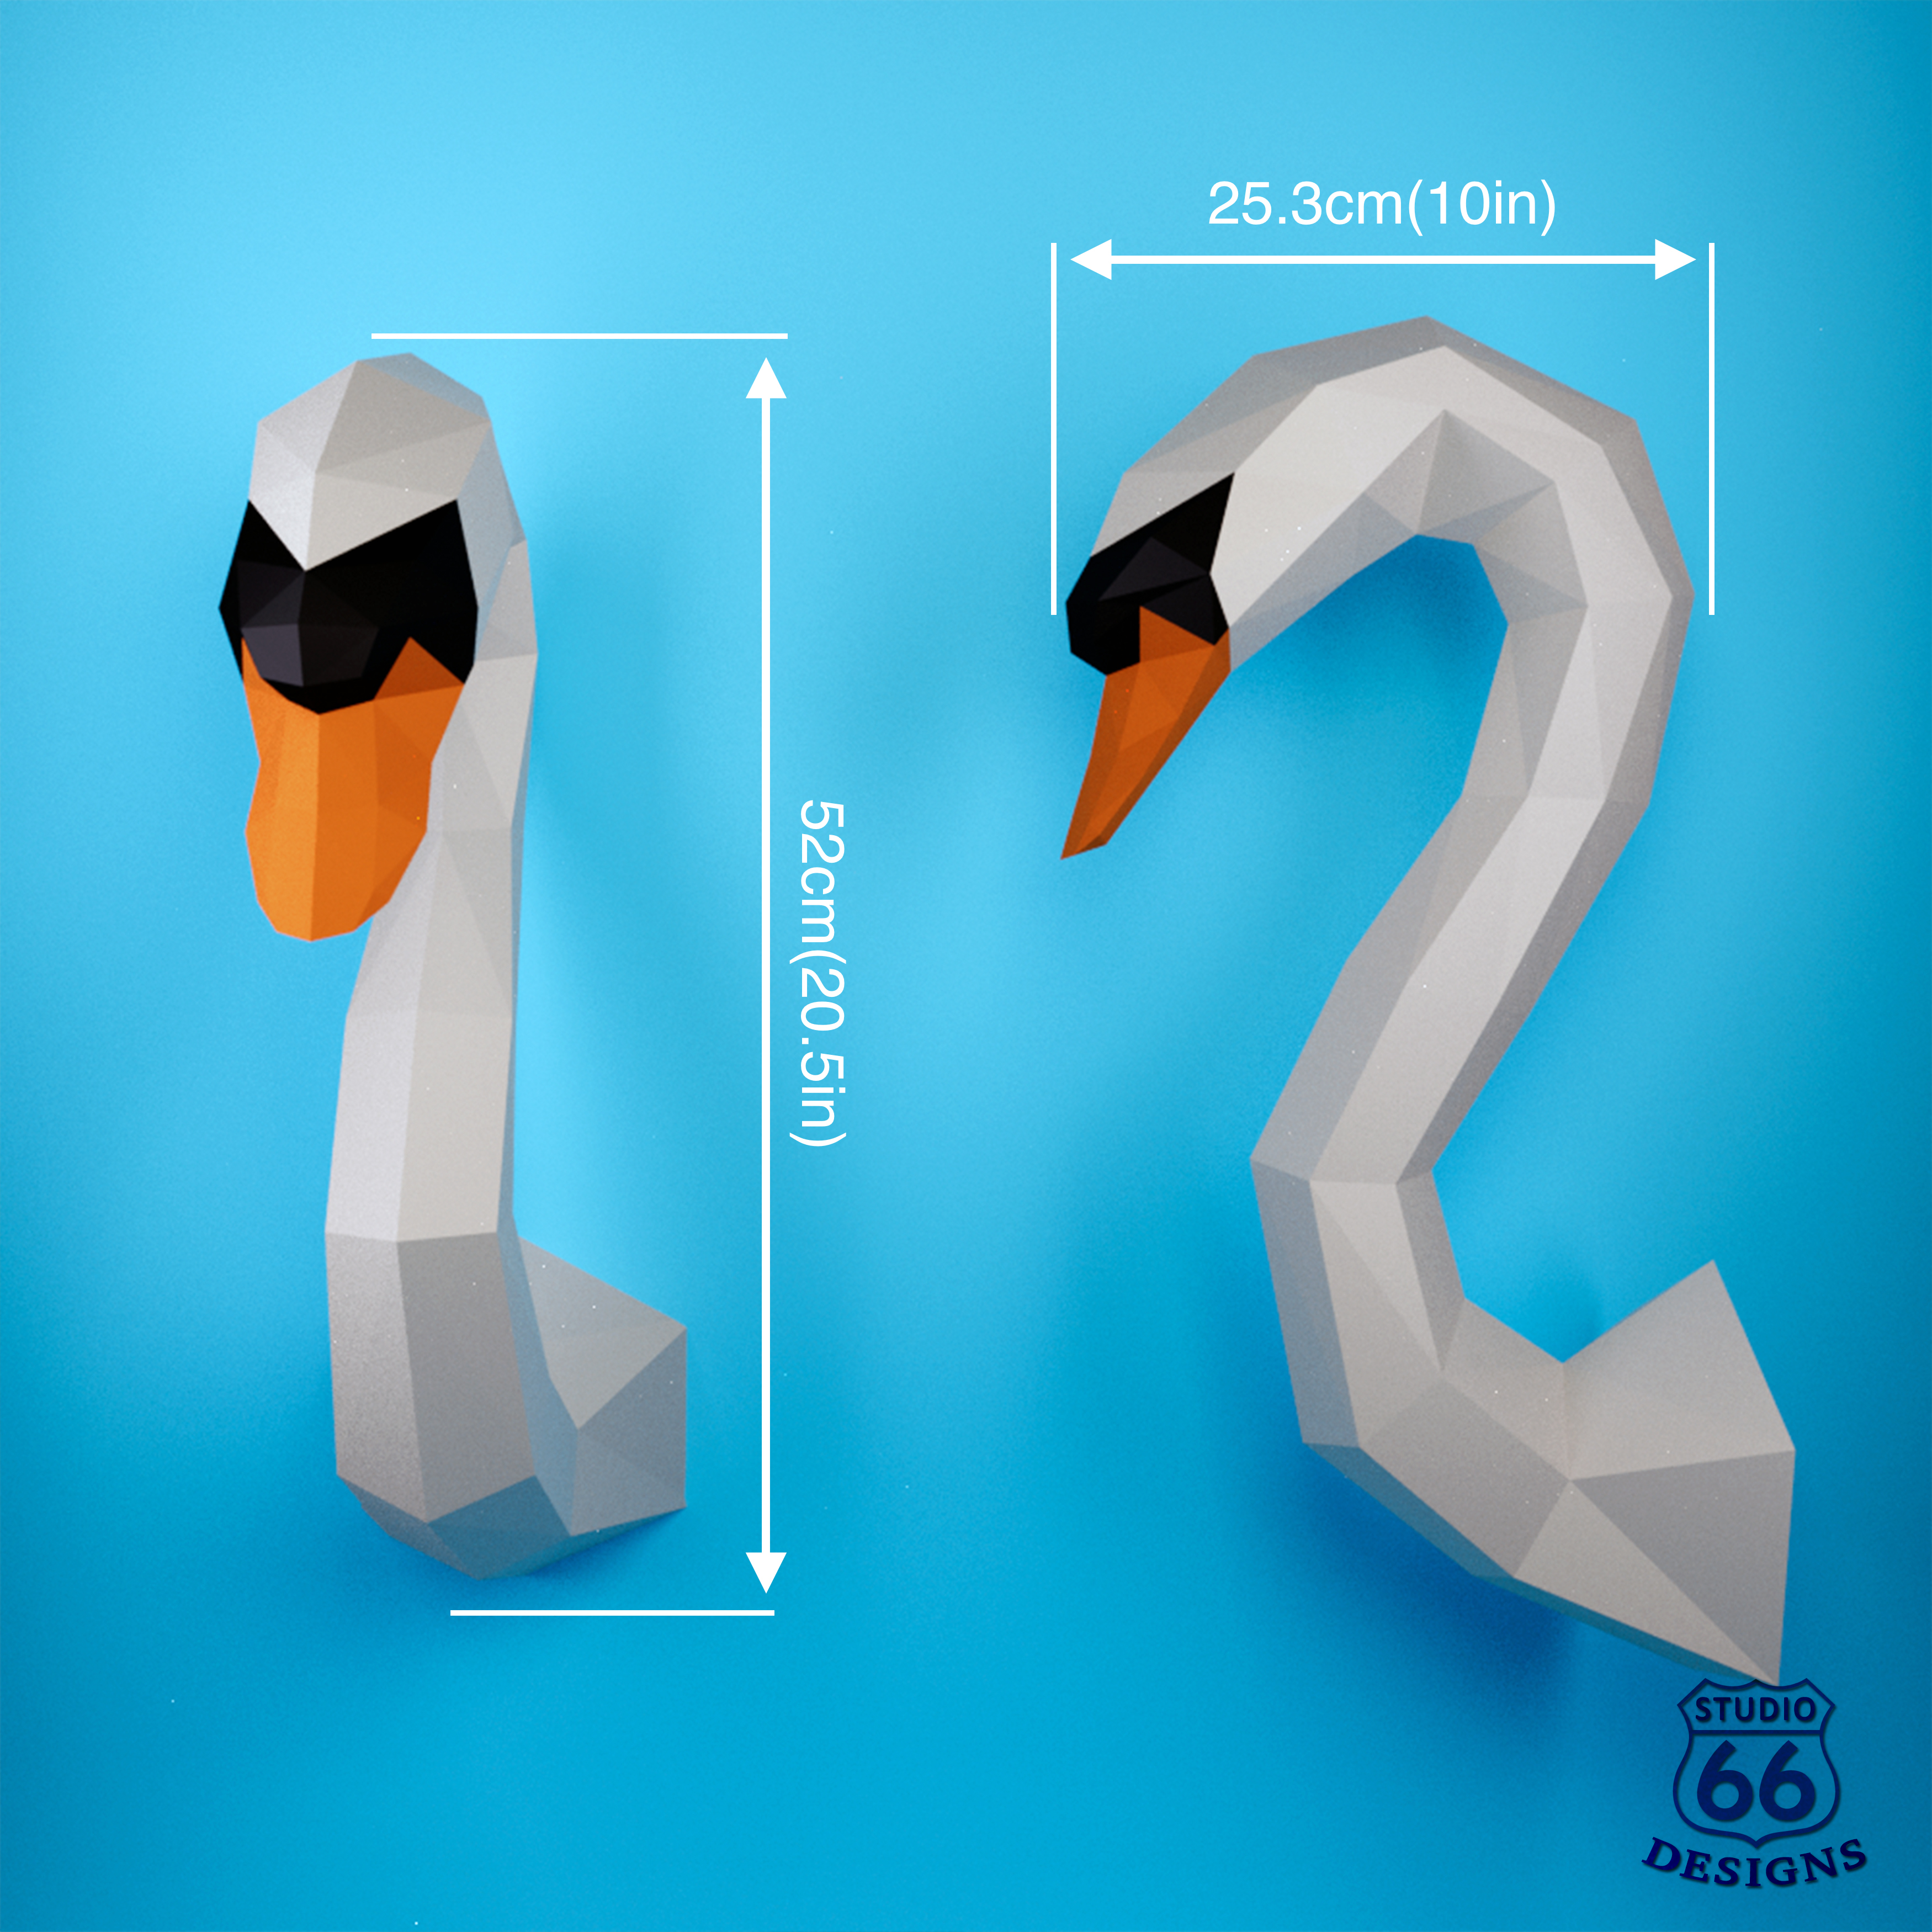 How To Make A Origami 3D Swan Papercraft Swan Paper Craft Swan 3d Paper Craft Sculpture Paper Bird Origami Bird Decor Diy 3d Papercraft Lowpoly Statue Trophy Head